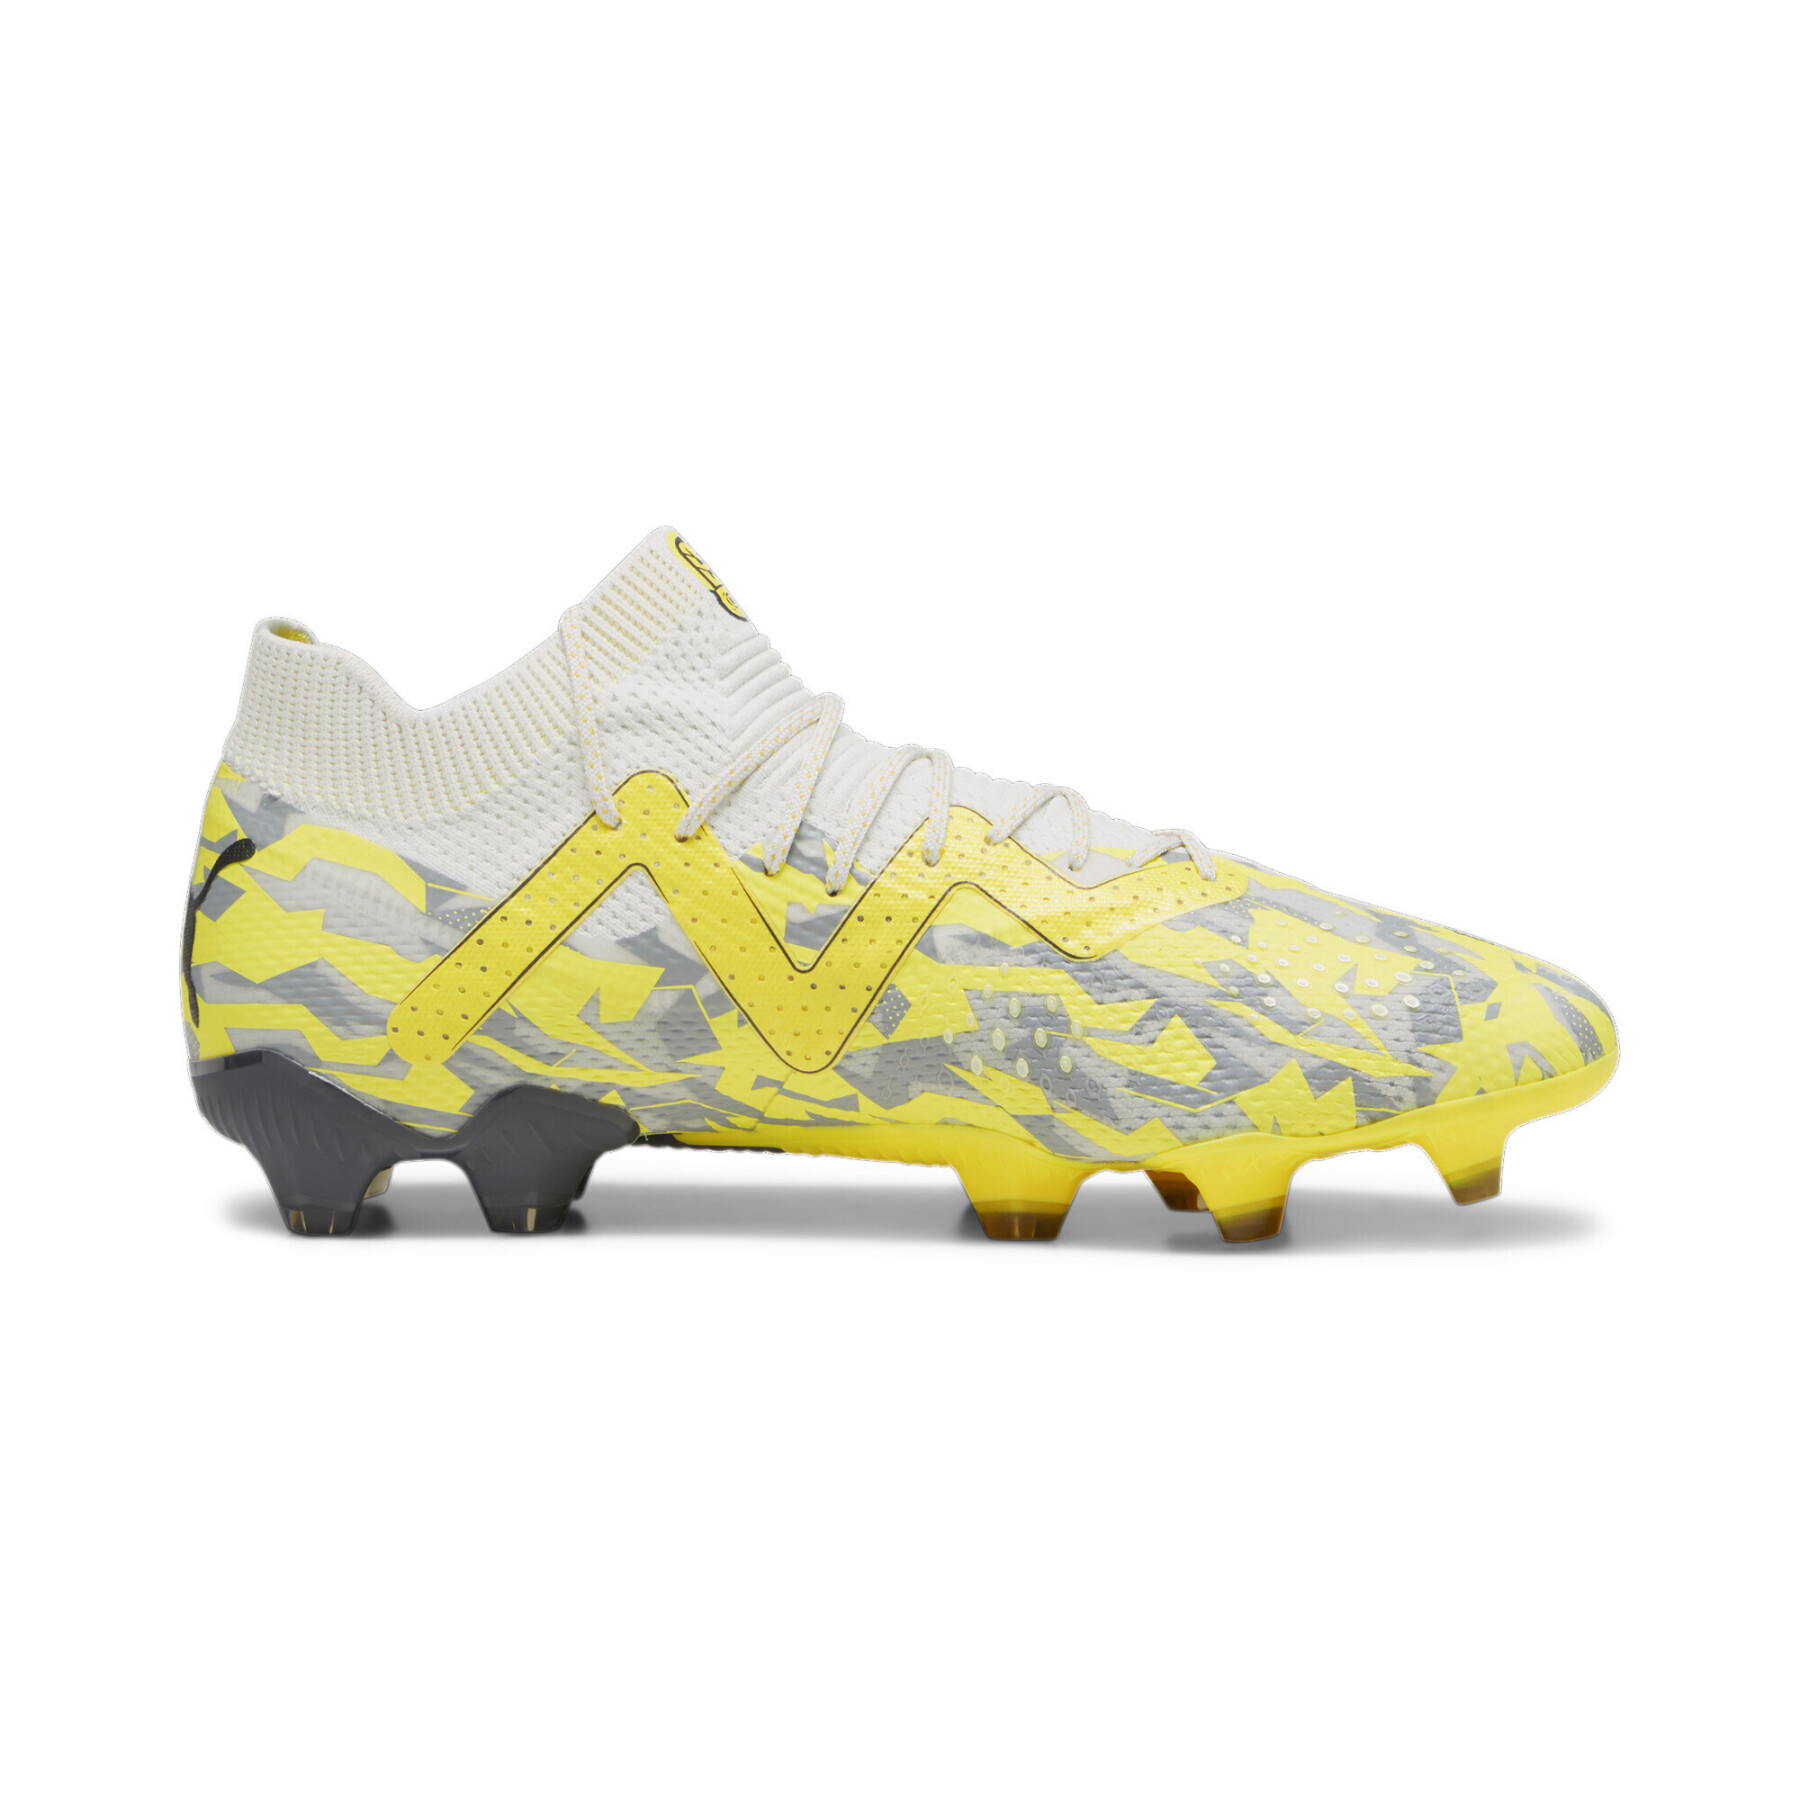 Soccer shoes Puma Future Ultimate FG/AG - Voltage Pack